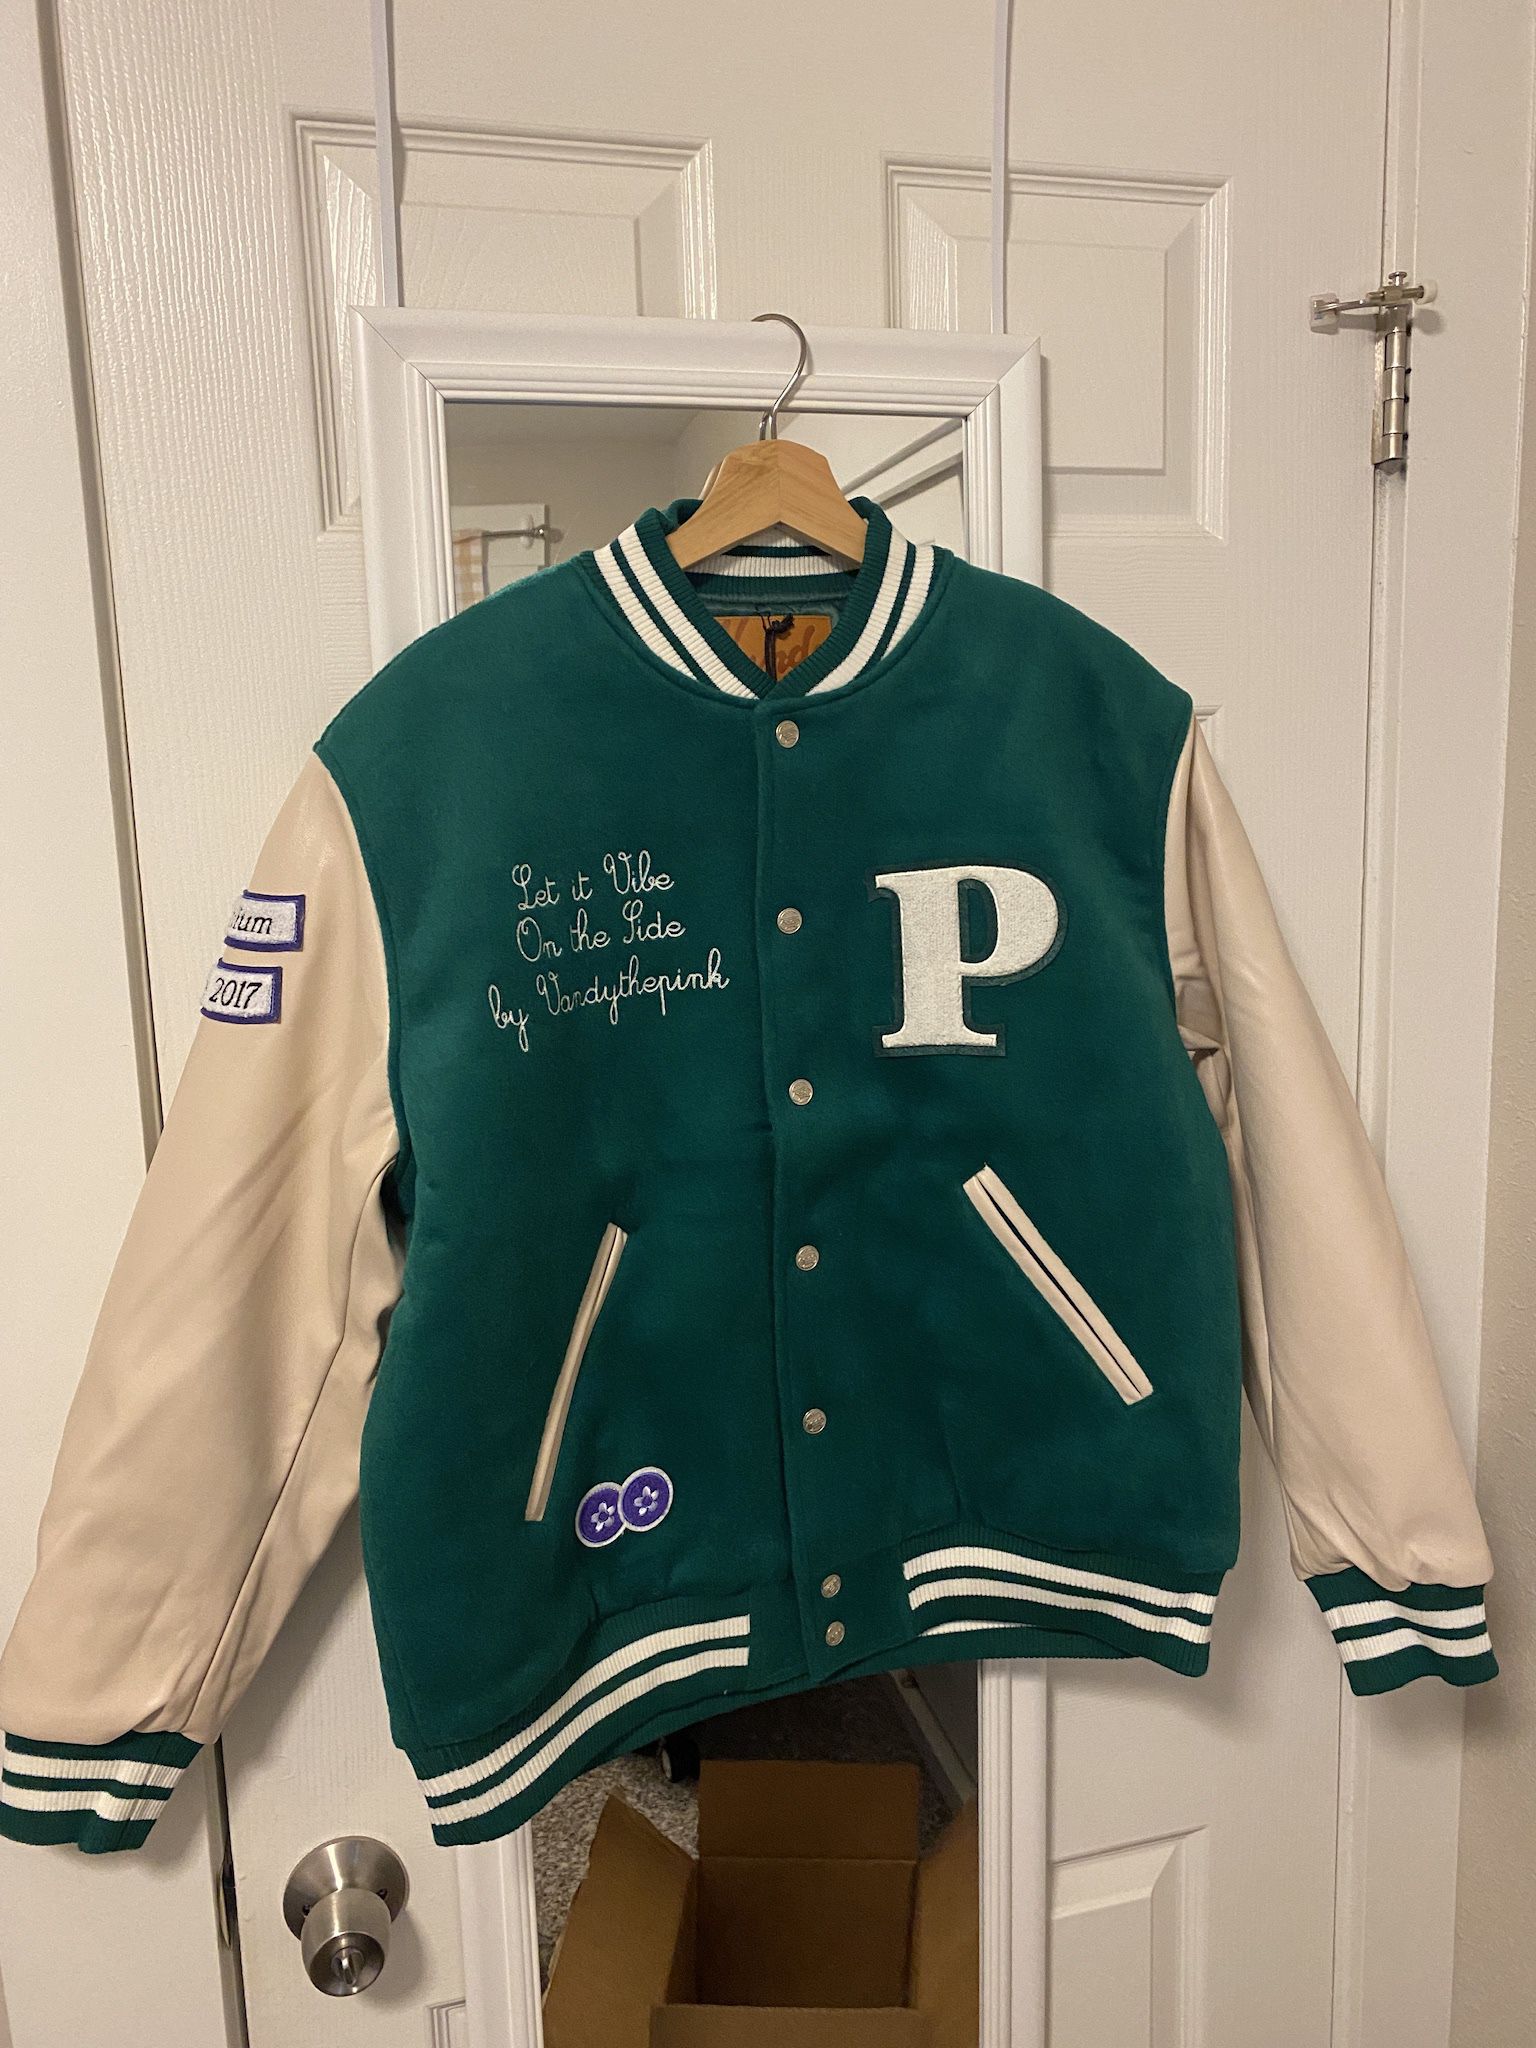 Vandy the Pink Varsity Jacket Parsley for Sale in Federal Way, WA - OfferUp